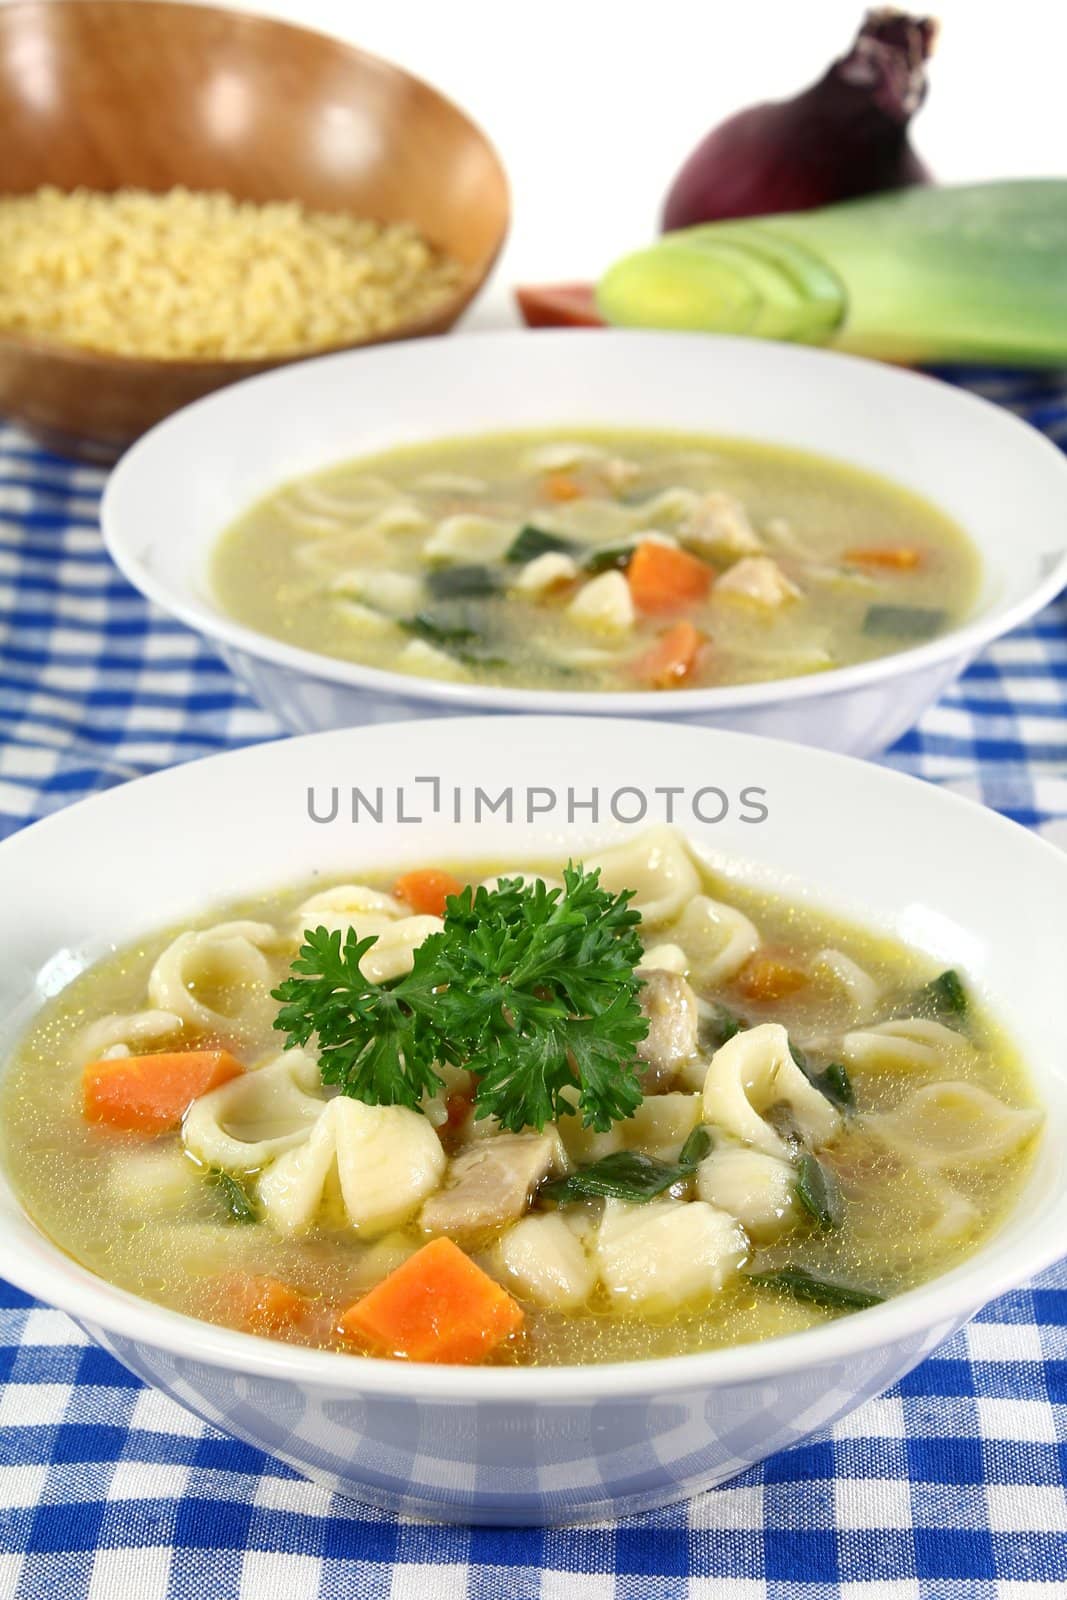 Chicken soup by silencefoto